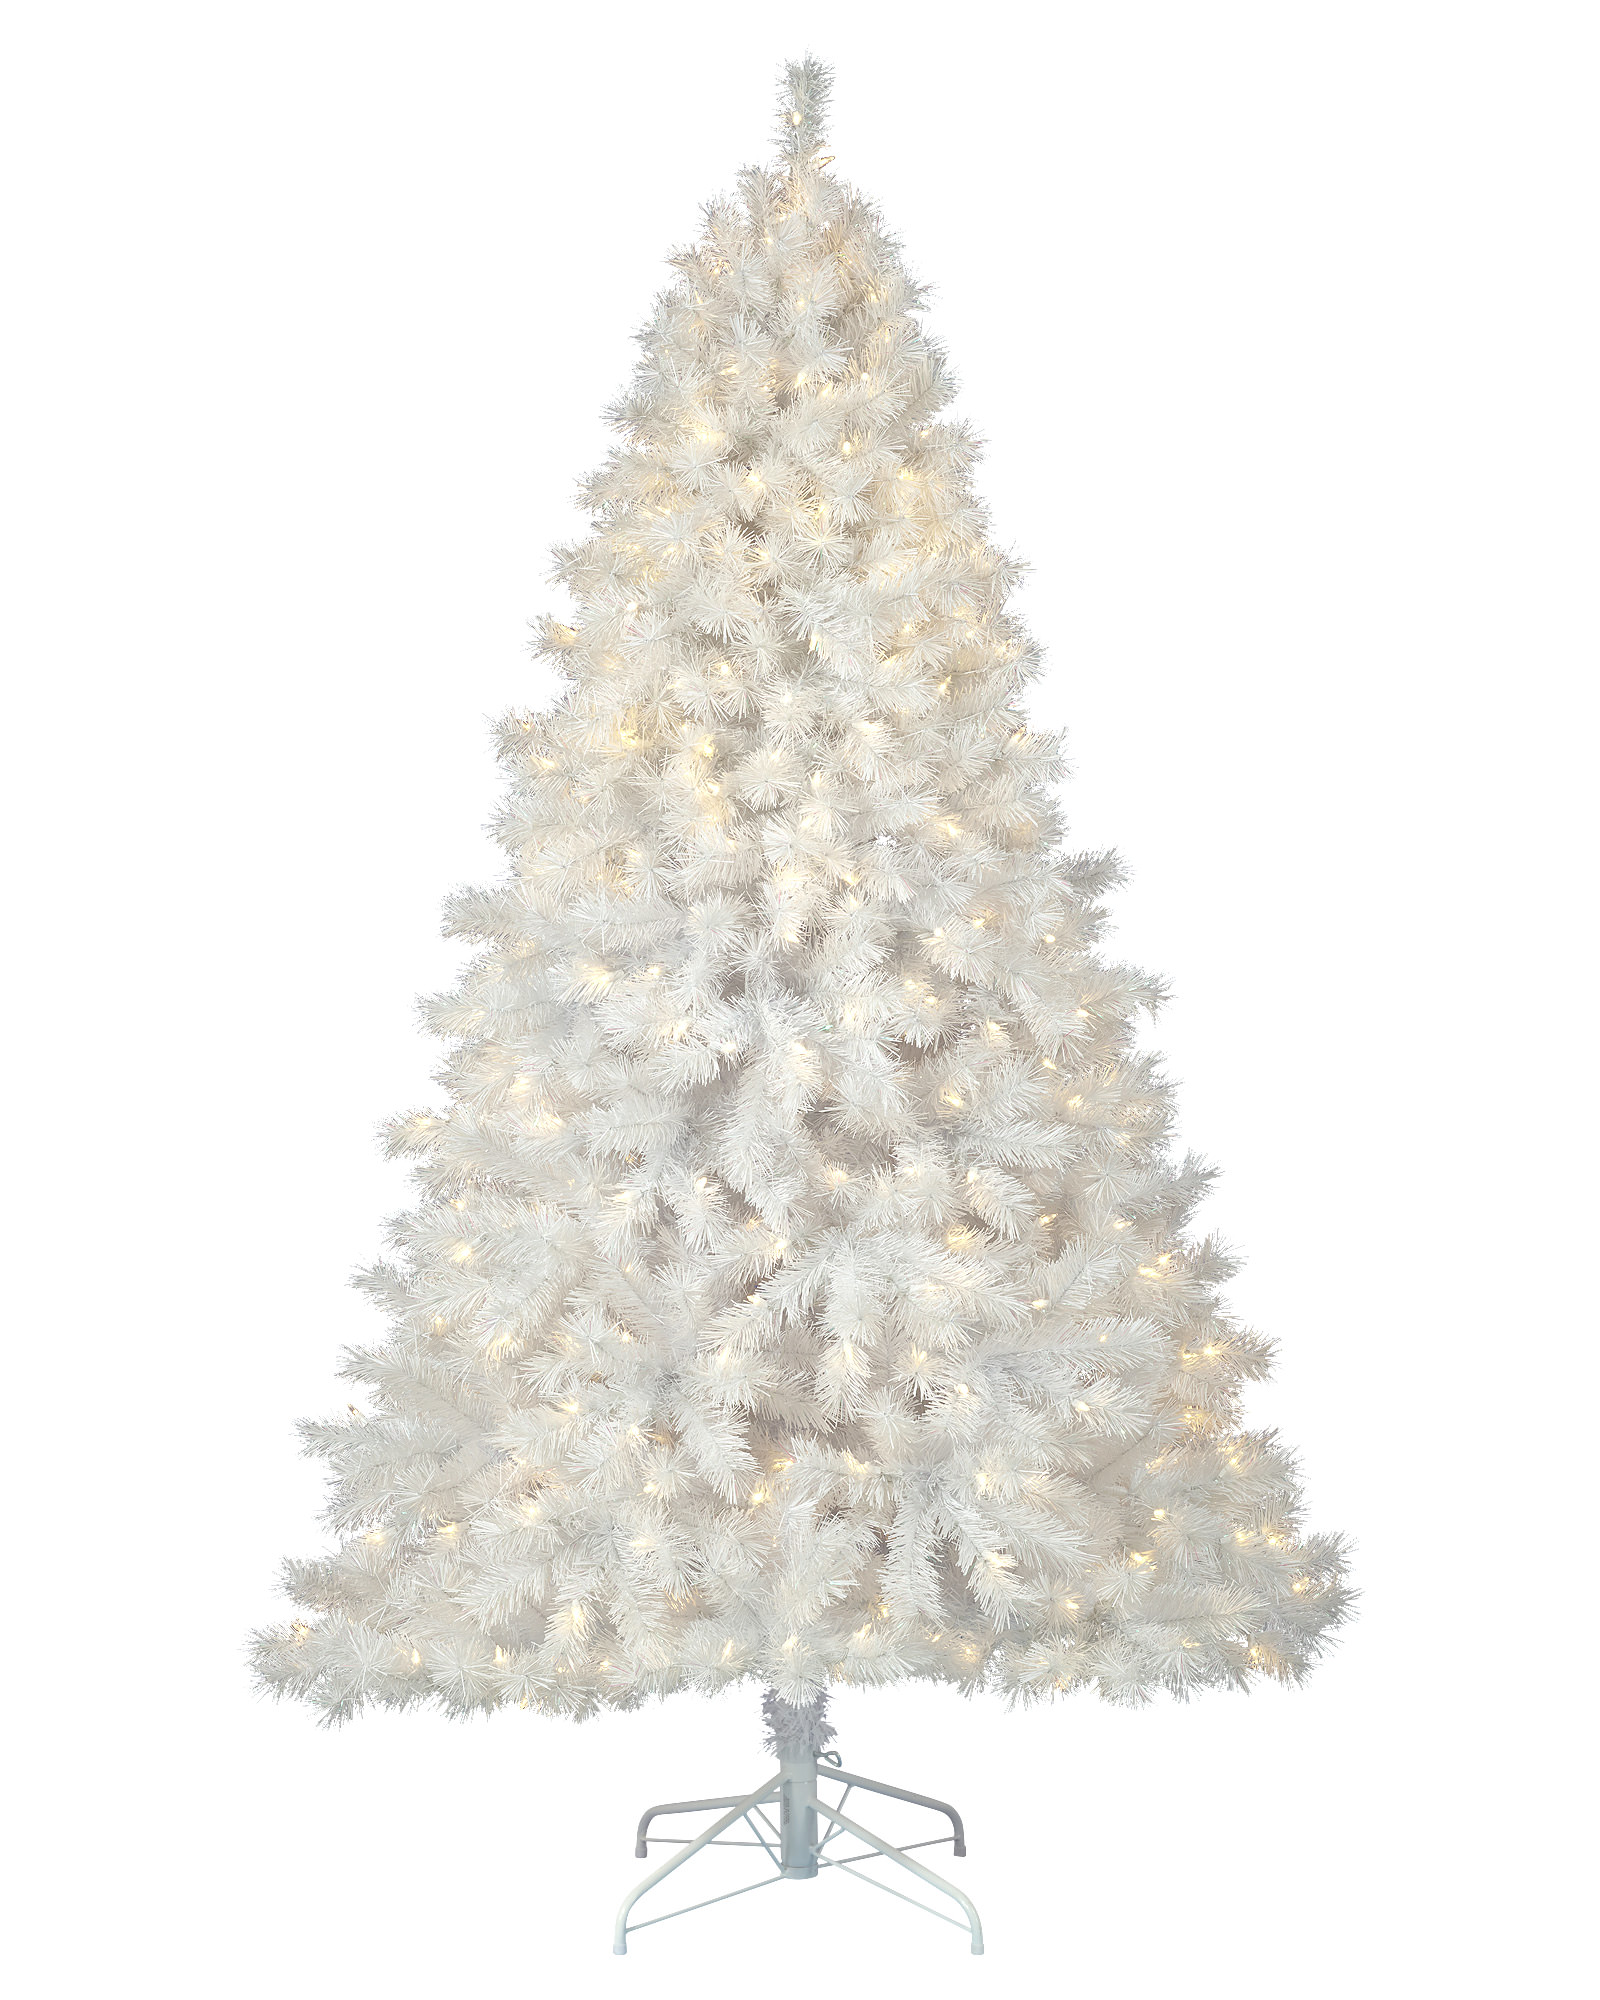 Multicultural White Christmas Tree | Treetopia